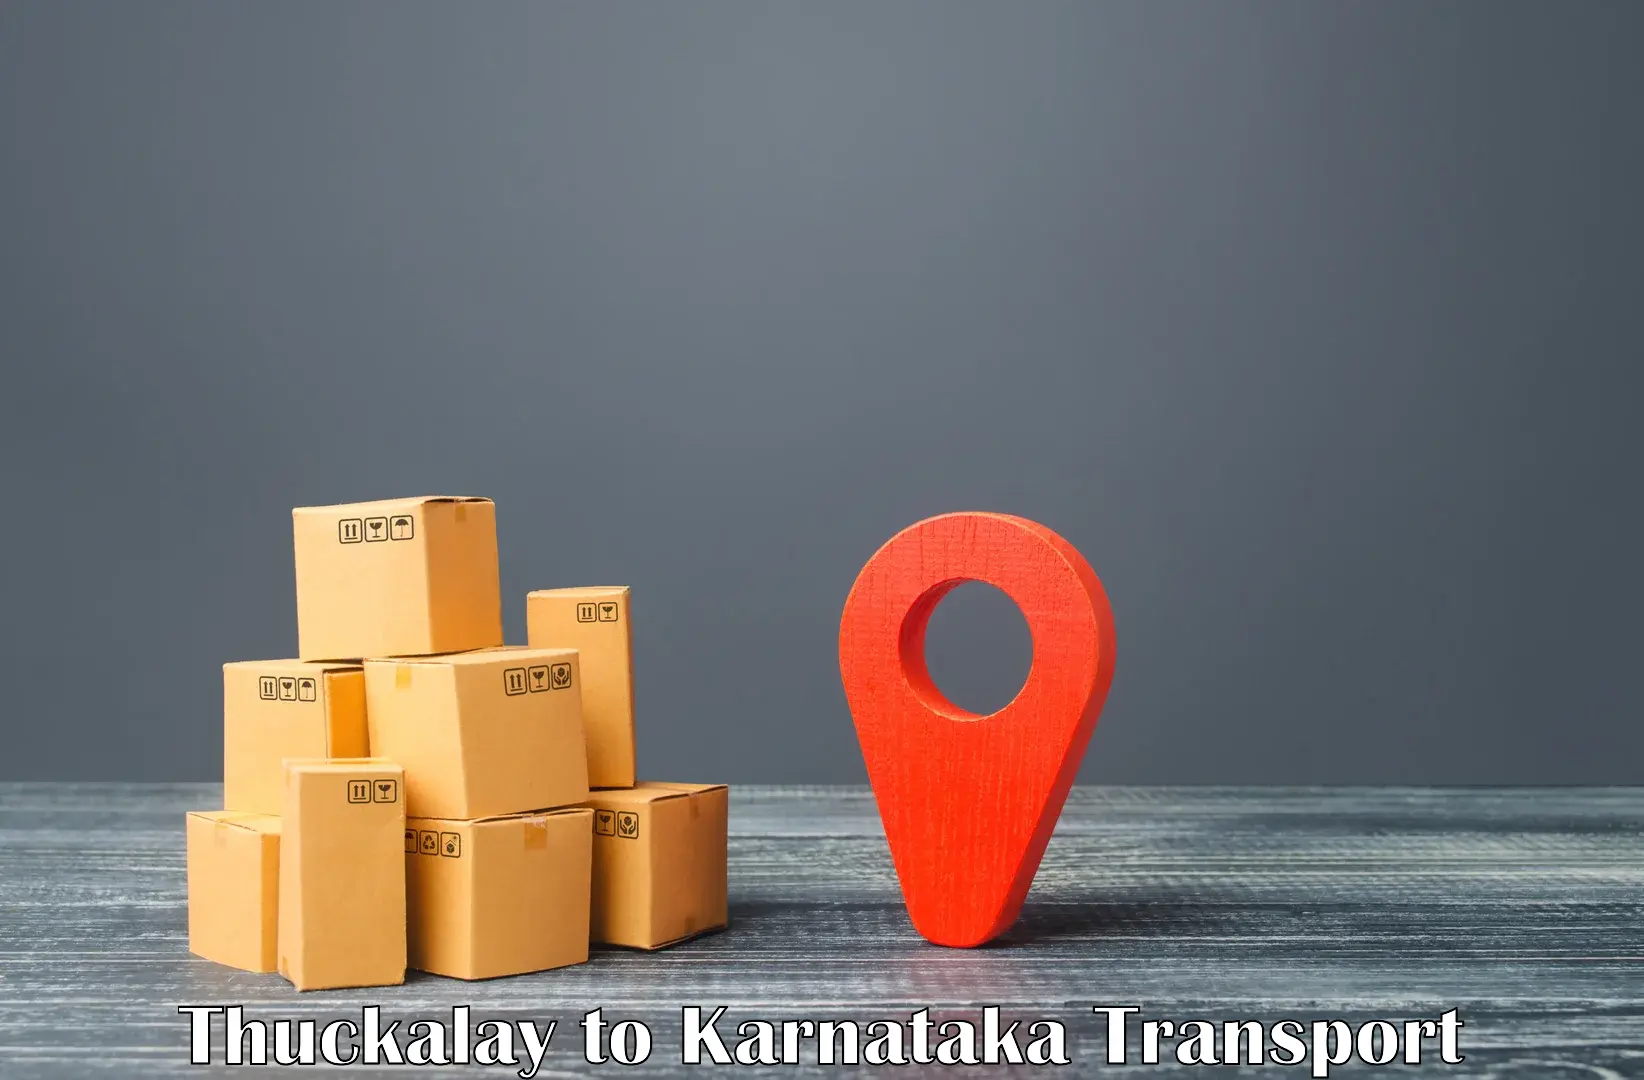 Truck transport companies in India Thuckalay to Manipal Academy of Higher Education